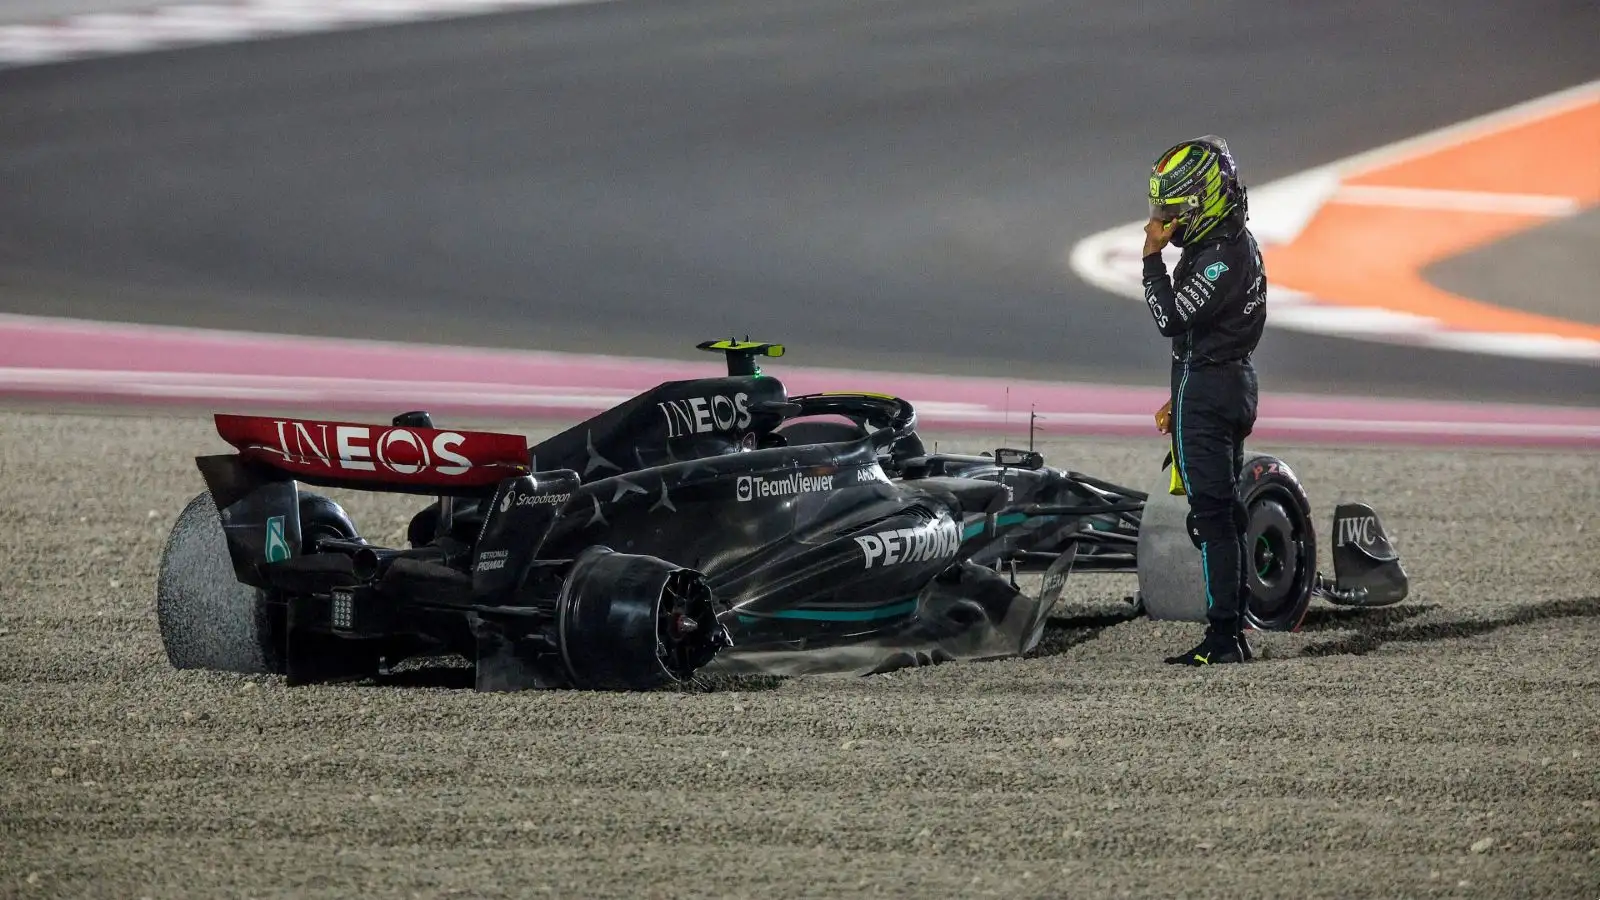 Mercedes driver Lewis Hamilton looks on at his crashed Q14 during the Qatar Grand Prix.